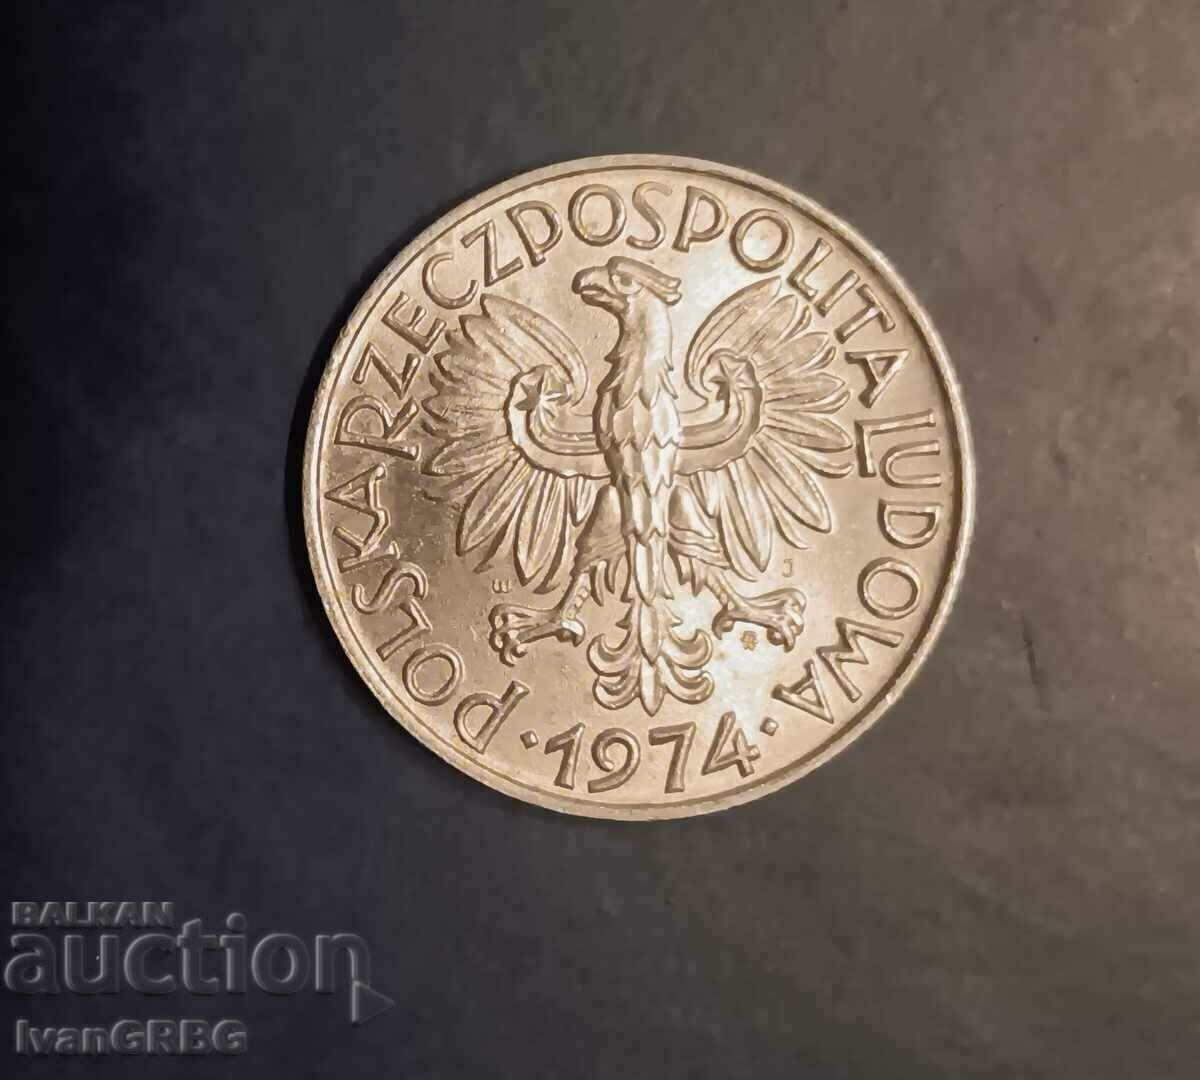 5 zlotys 1974 Poland PERFECT CONDITION